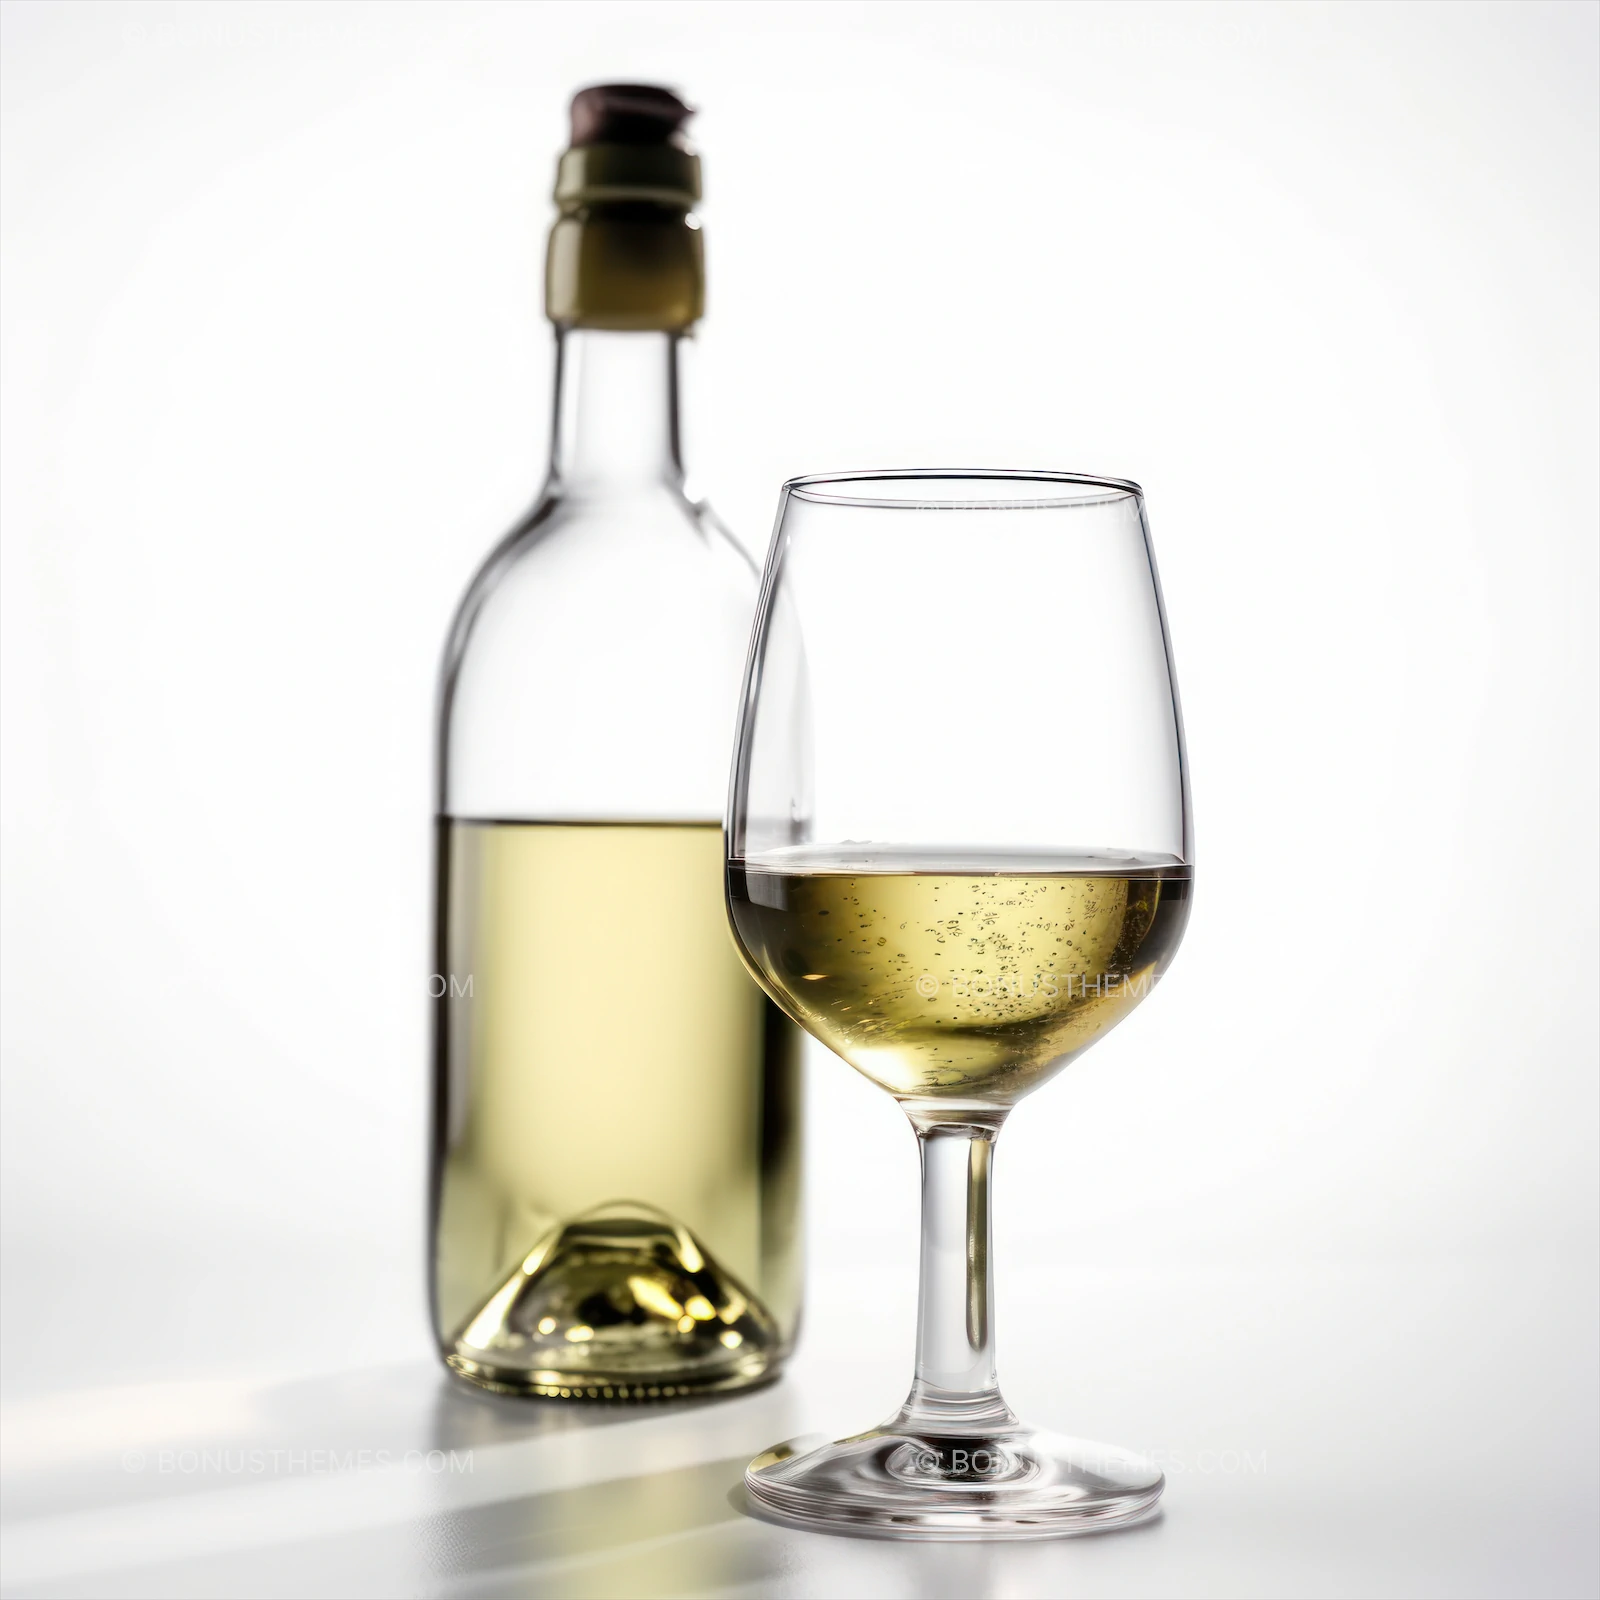 Bottle of white wine standing next to glass on isolated white background